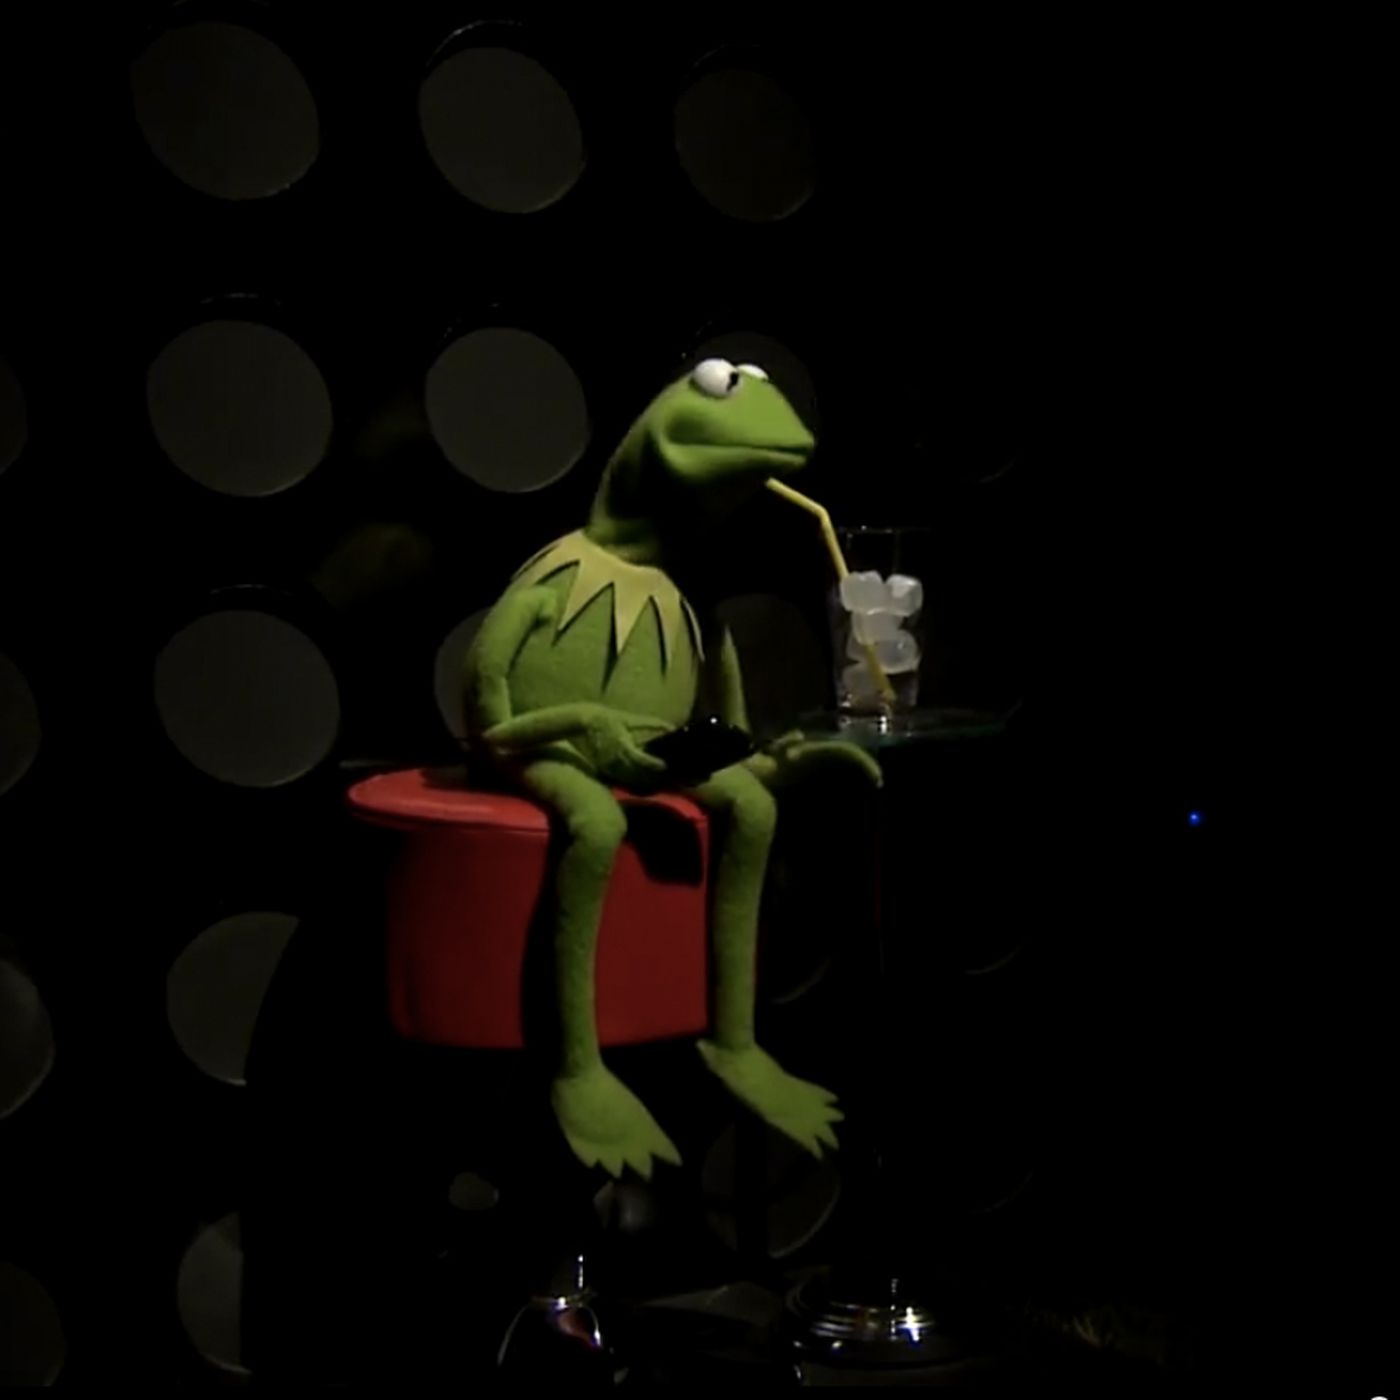 Disney fired Kermit the Frog's voice actor. The result? An existential crisis